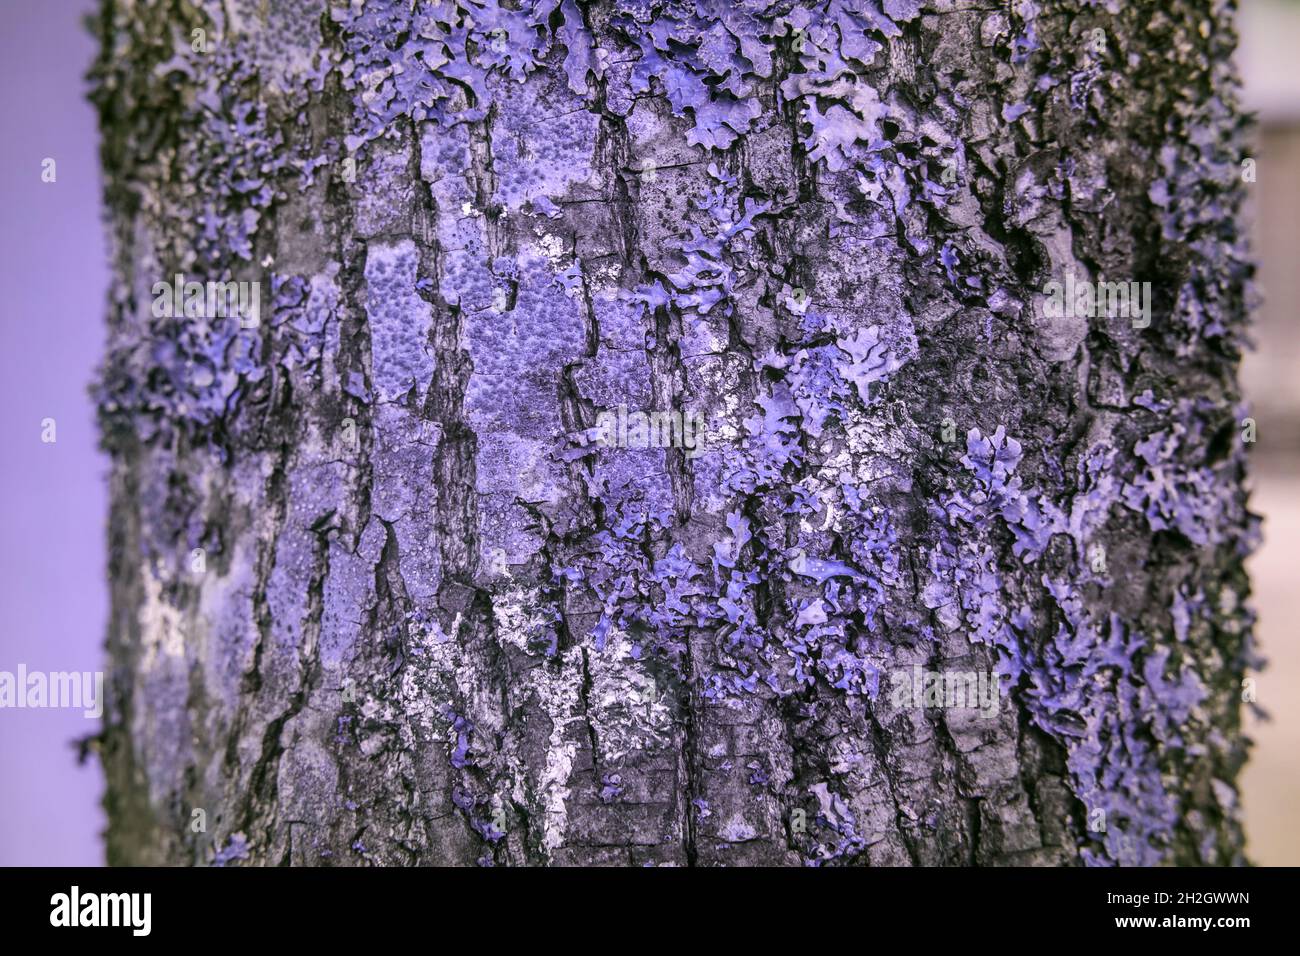 Lichen on a tree in reflected ultraviolet photography Stock Photo